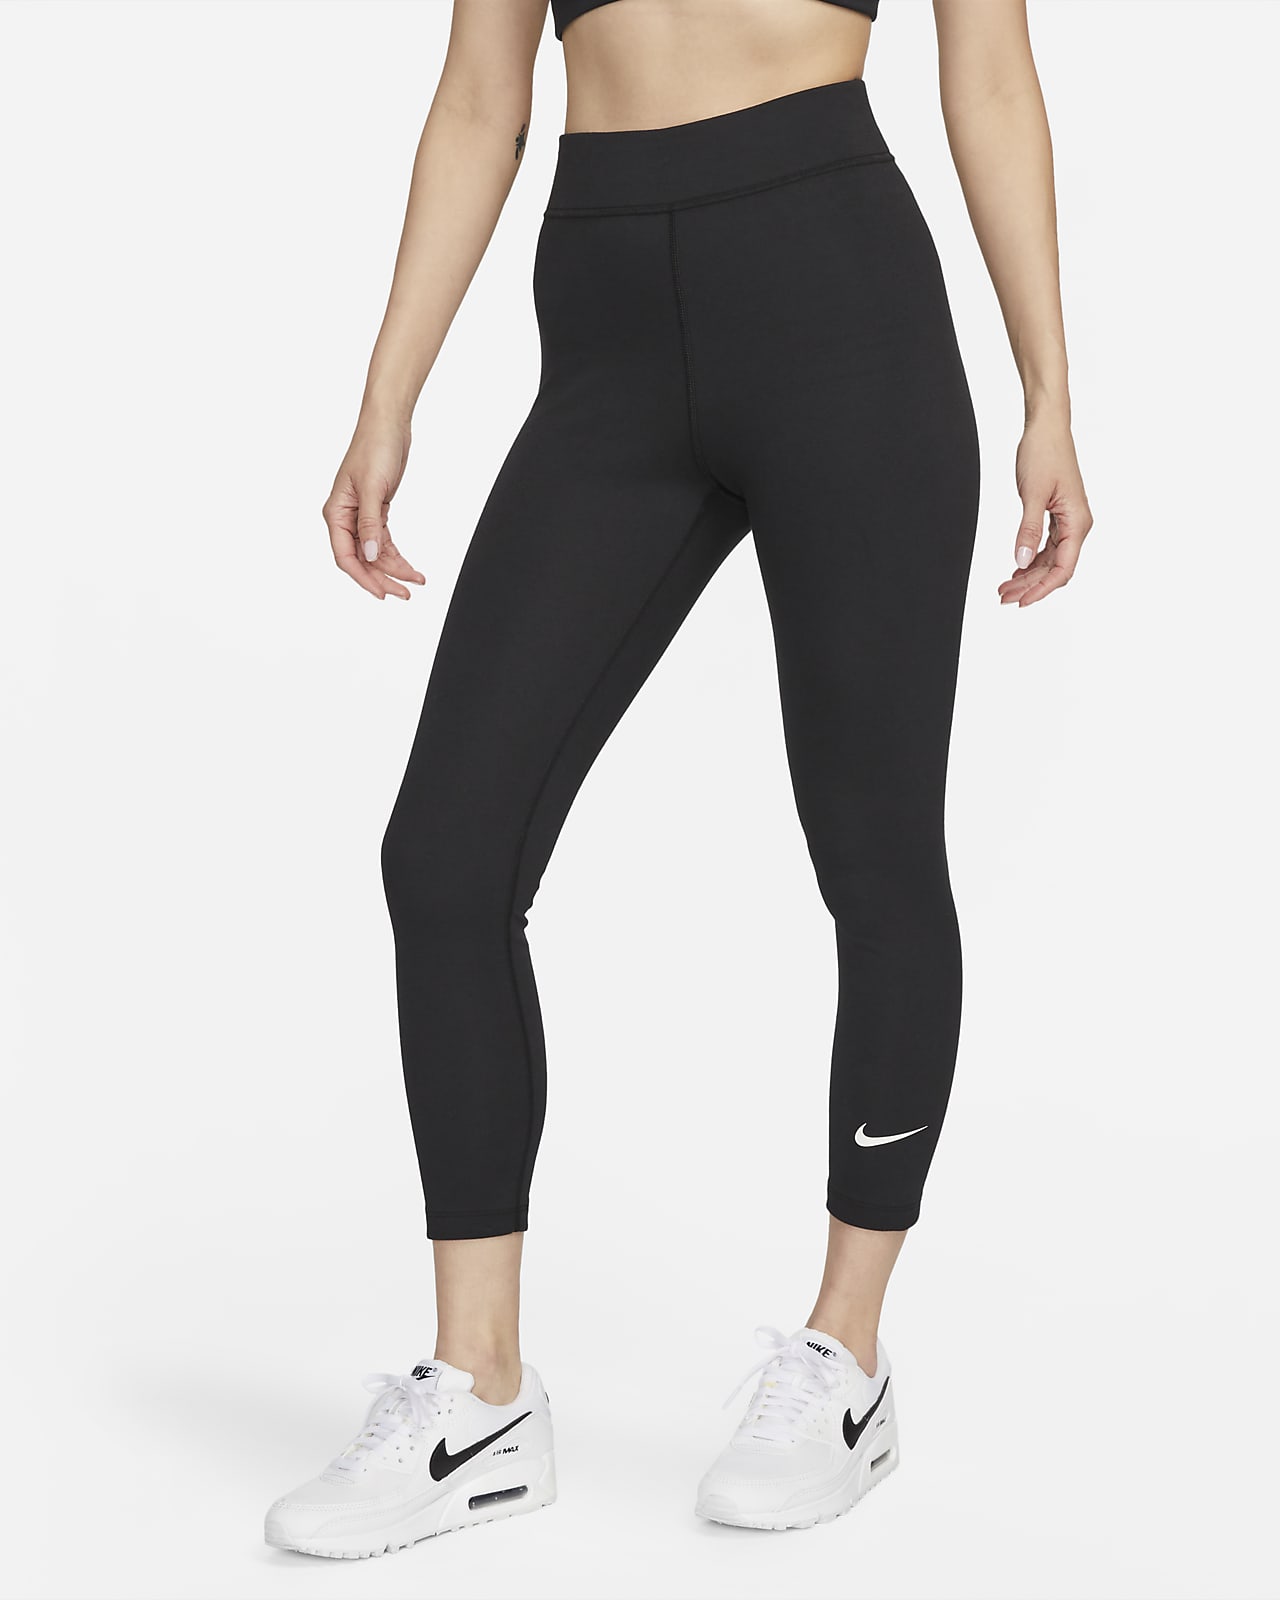 Buy Womens Lot 3 Leggings Calvin Cline, Nike, and Calia by Carrie Underwood  M and L Yoga Pants Online in India 